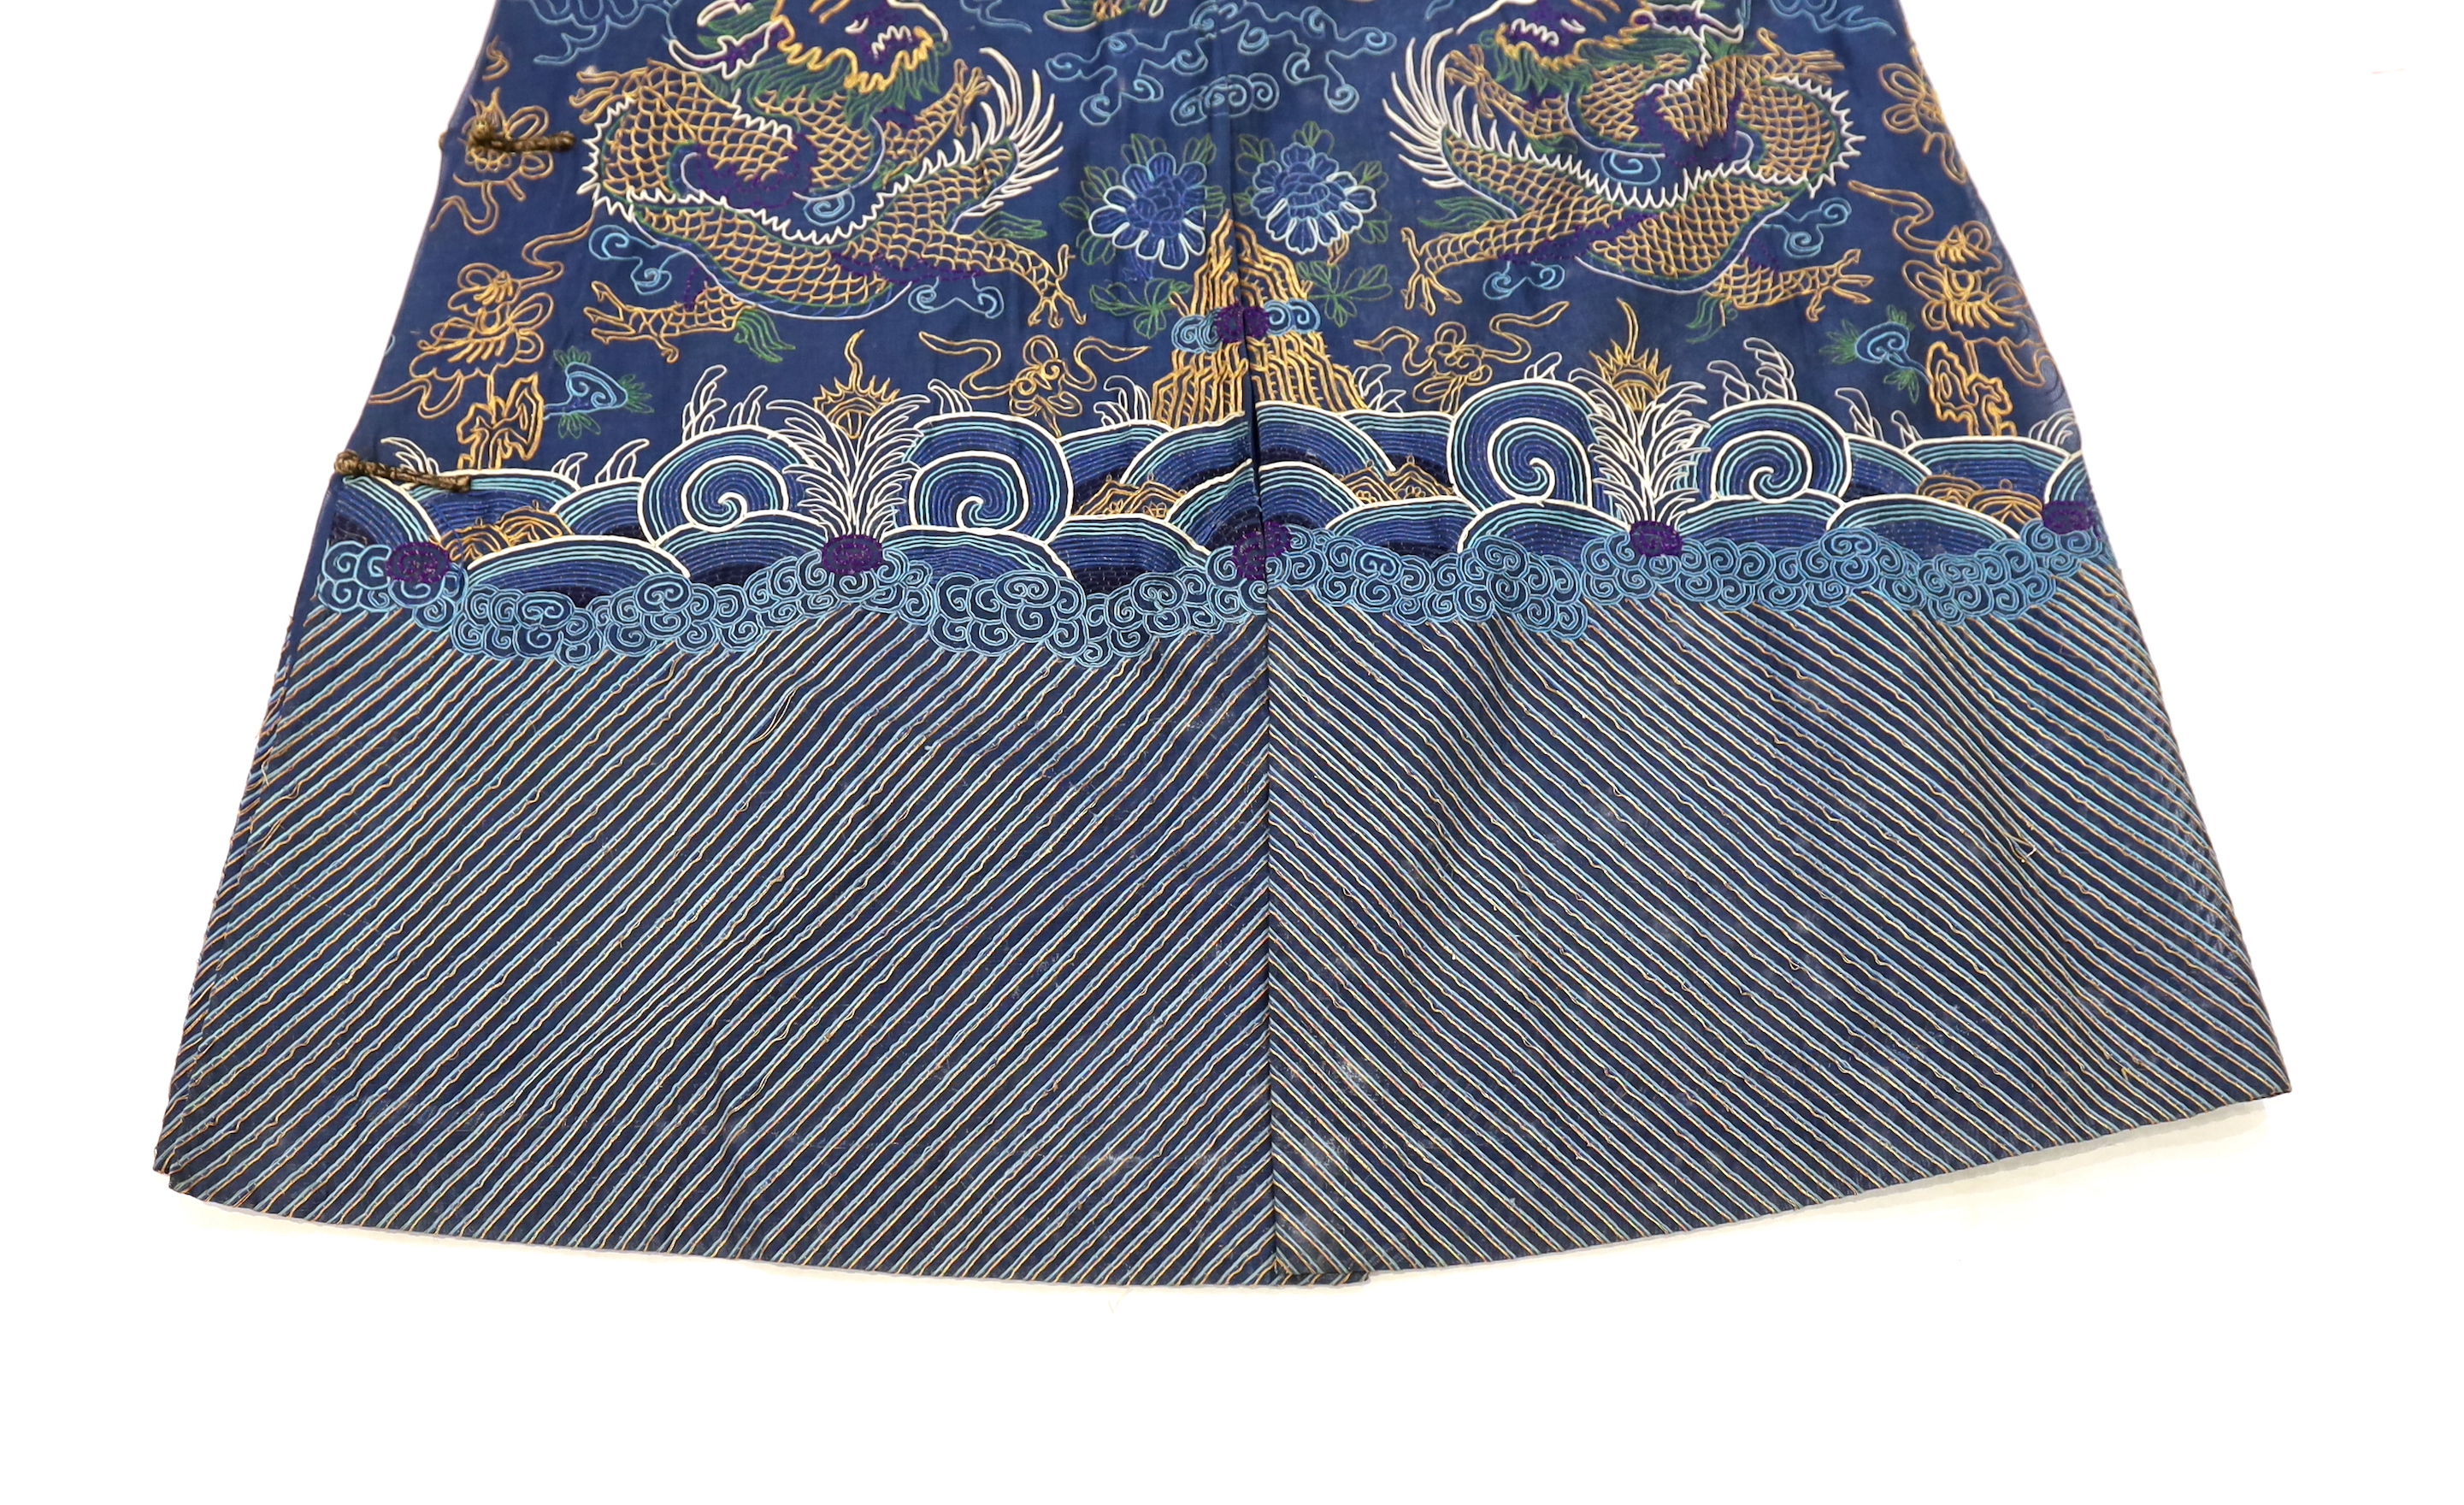 A Chinese fine blue gauze summer robe embroidered with a gold thread dragon highlighted by coloured silk embroidery together with a similar gauze panel embroidered with dragons, 163cm x 75cm